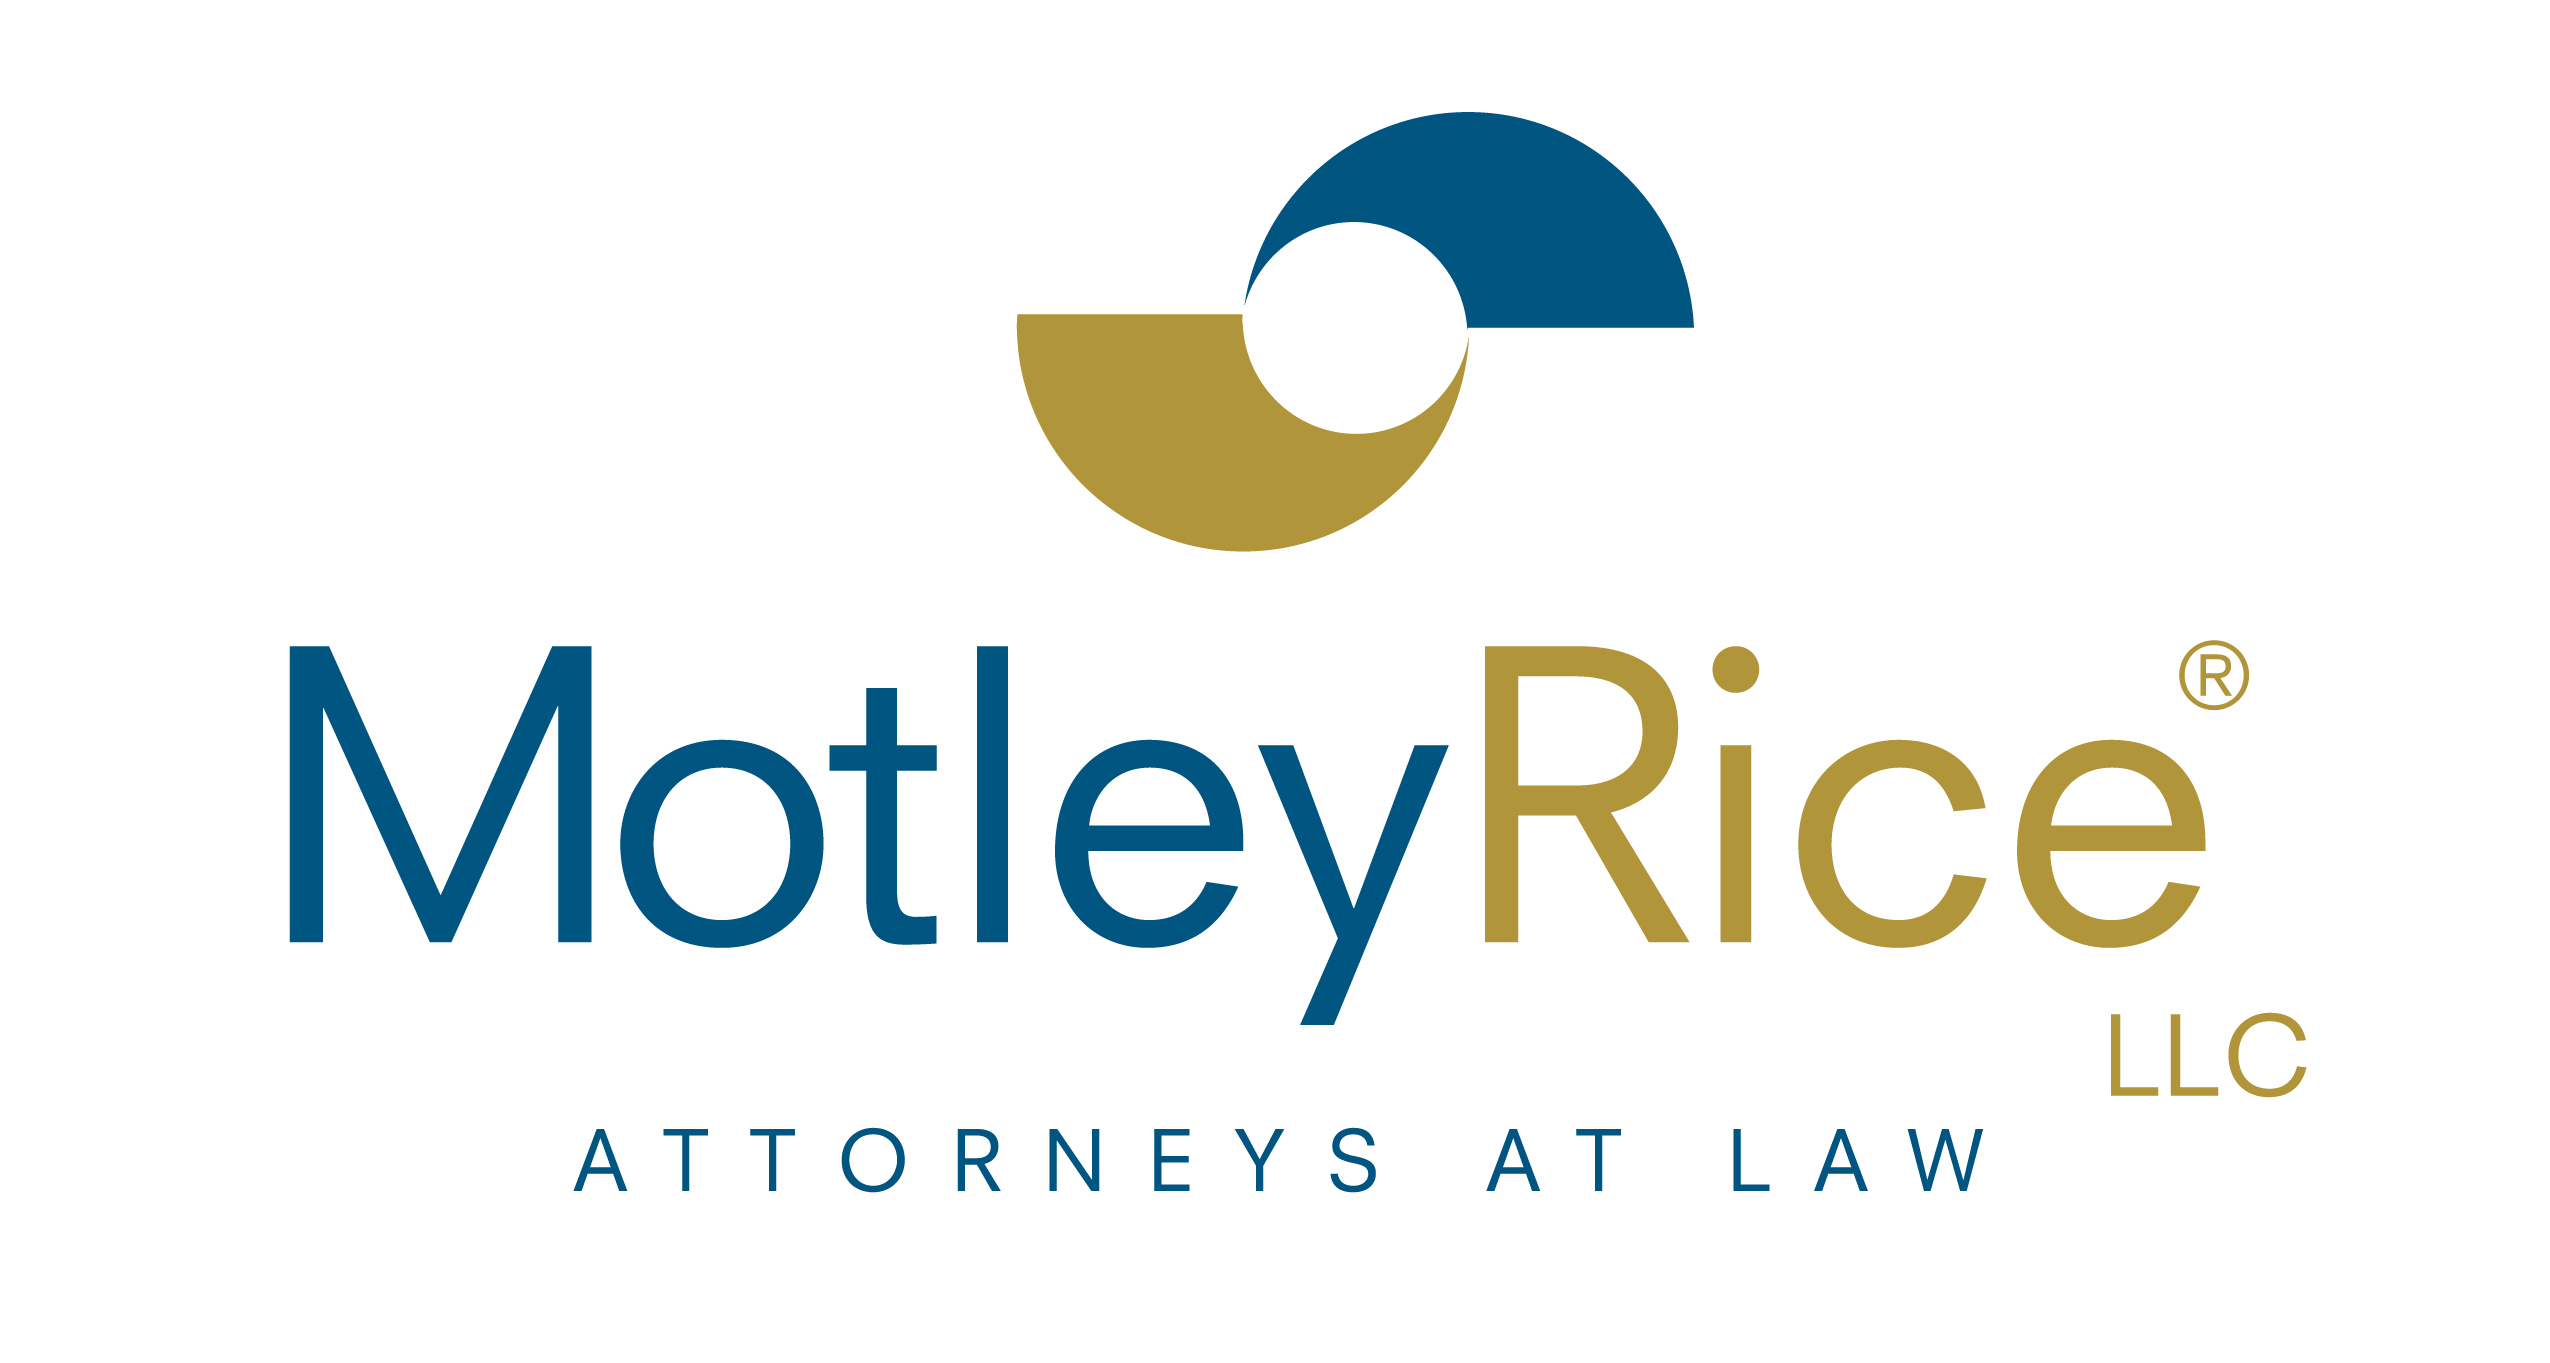 Motley Rice Law Firm Expands Mass Tort Practice in Philadelphia Area ...